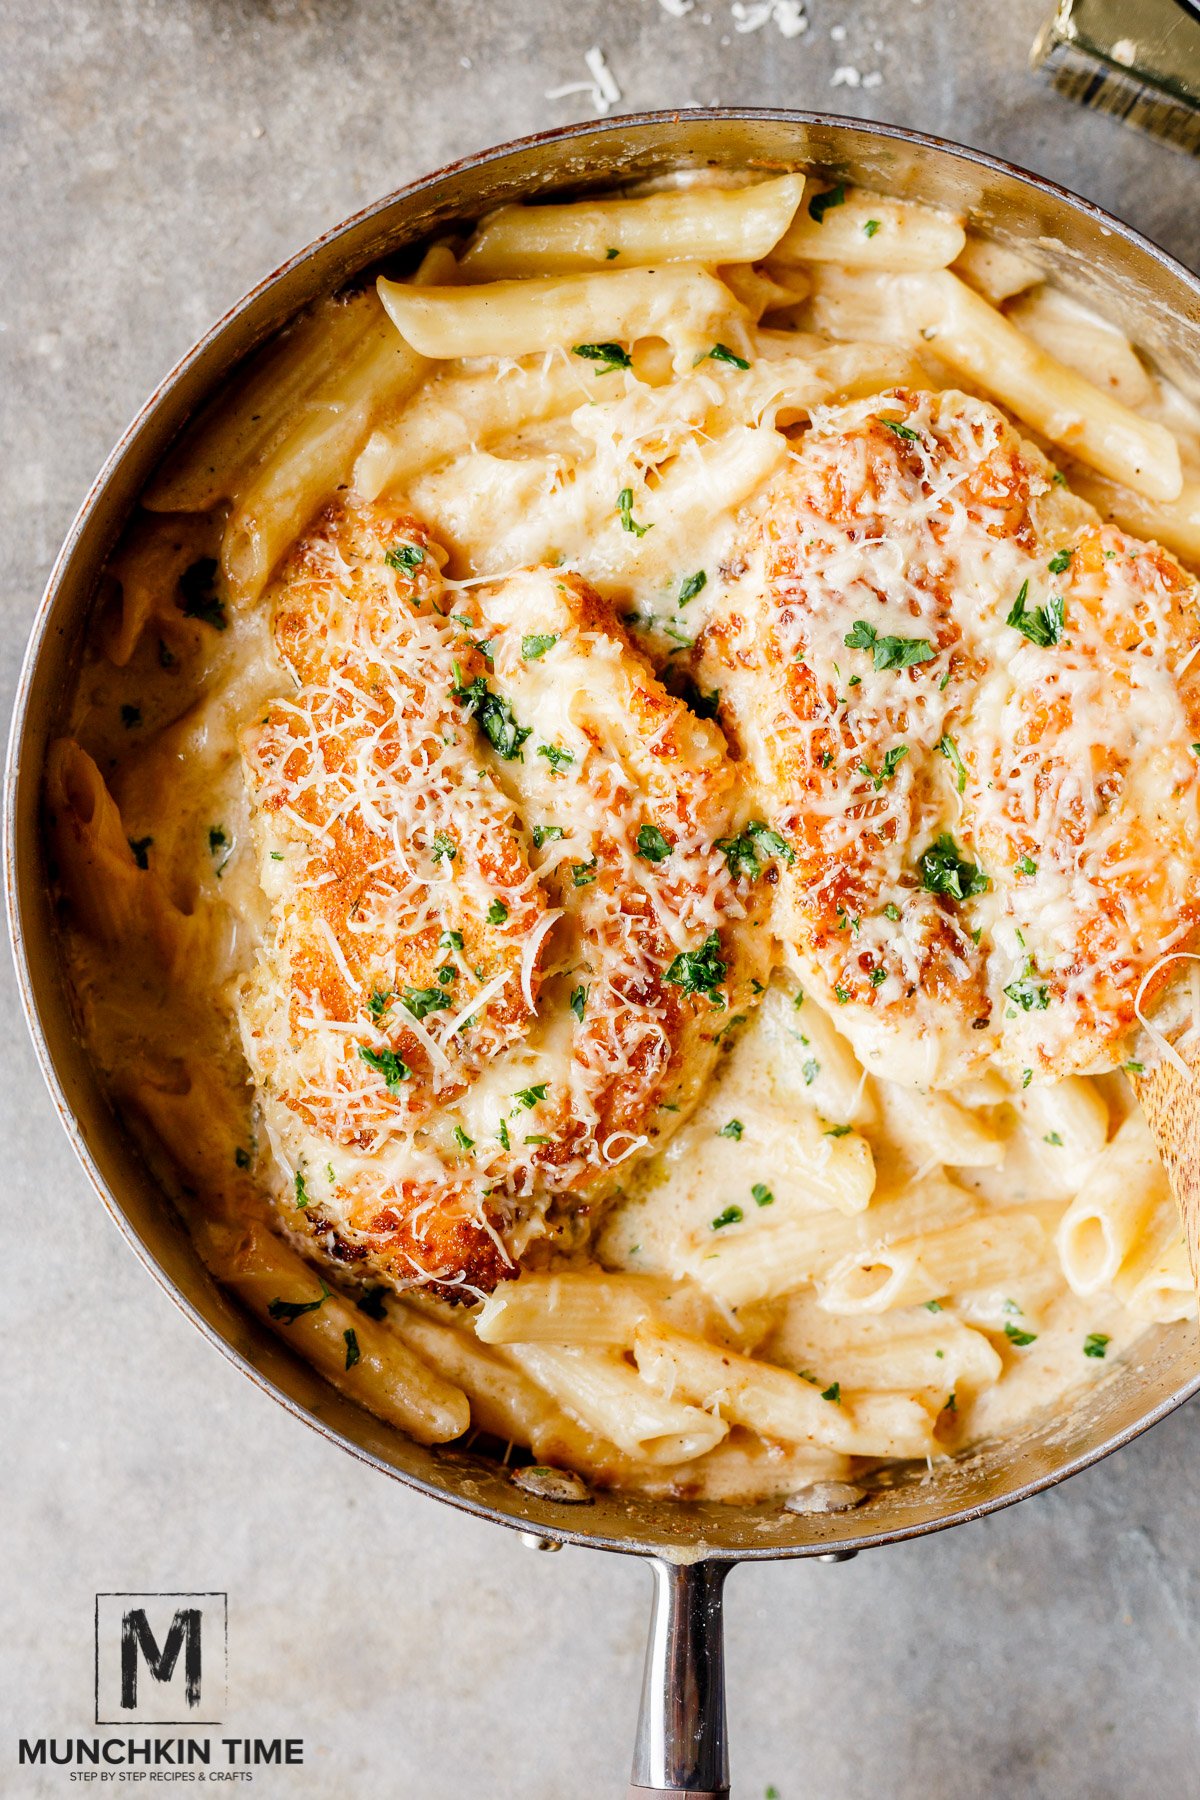 Easy Oven Baked Chicken Pasta in Buttery White Sauce - Munchkin Time